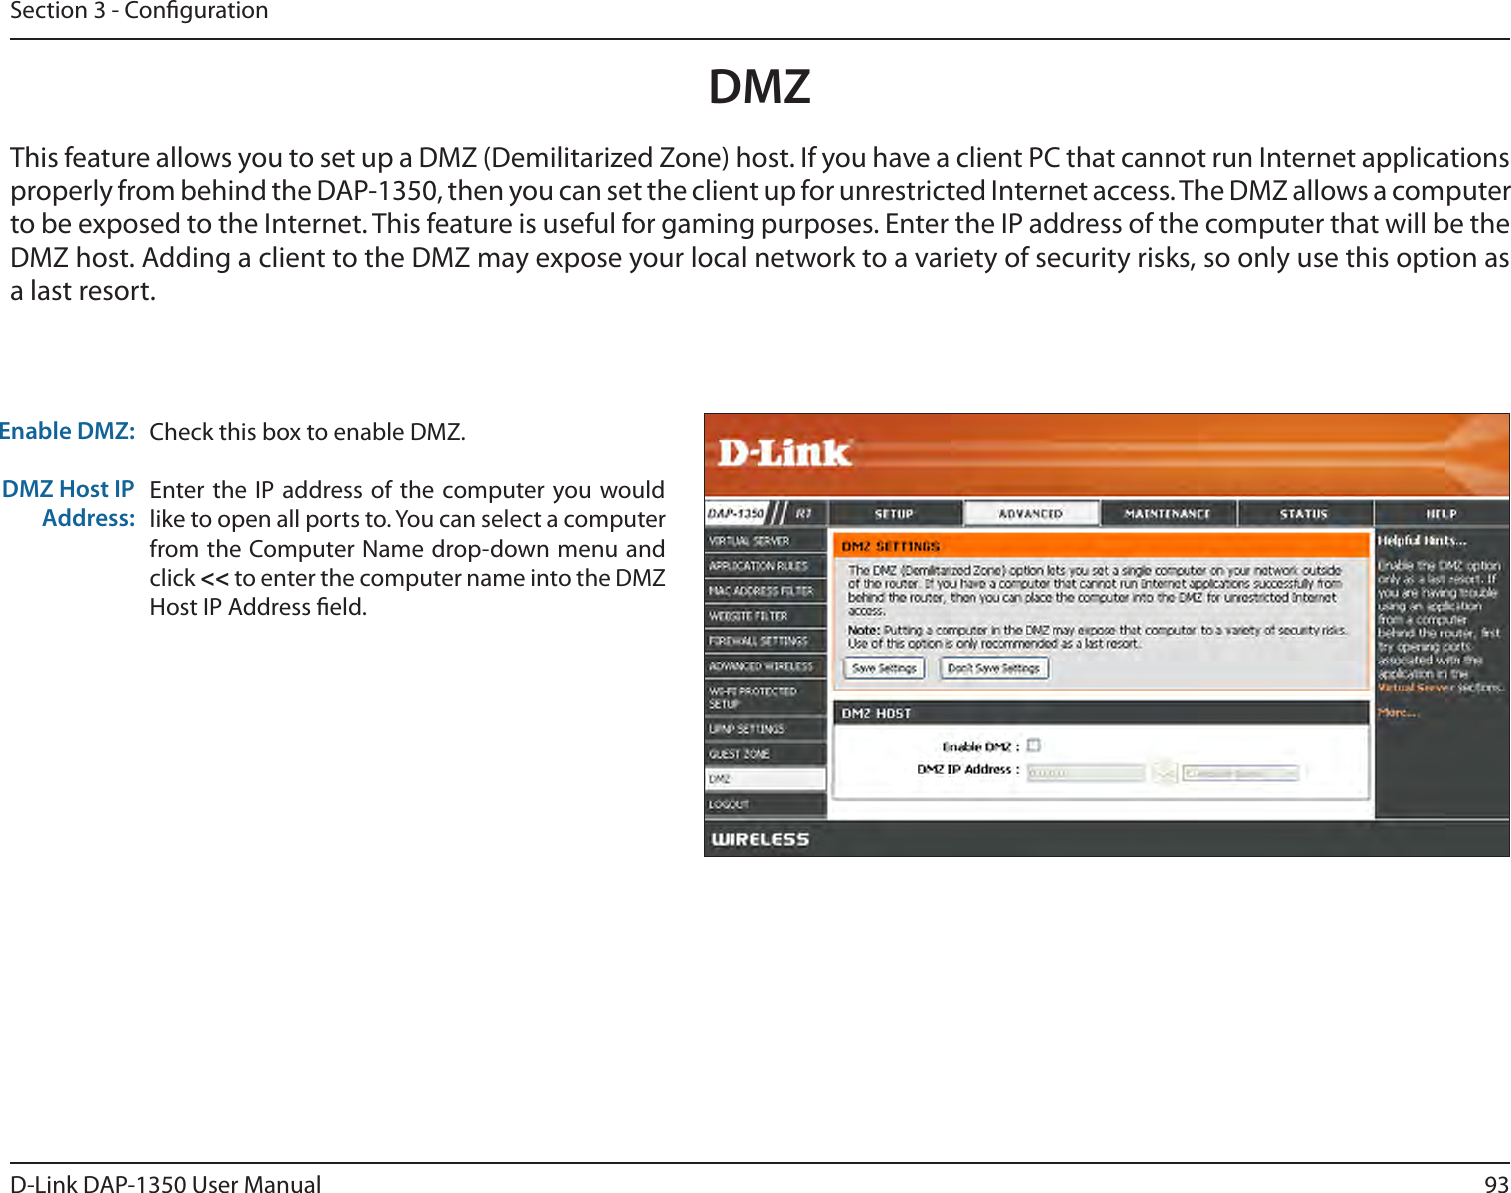 93D-Link DAP-1350 User ManualSection 3 - CongurationDMZCheck this box to enable DMZ.Enter the IP  address of the  computer you would like to open all ports to. You can select a computer from the Computer Name drop-down menu and click &lt;&lt; to enter the computer name into the DMZ Host IP Address eld.Enable DMZ:DMZ Host IP Address:This feature allows you to set up a DMZ (Demilitarized Zone) host. If you have a client PC that cannot run Internet applications properly from behind the DAP-1350, then you can set the client up for unrestricted Internet access. The DMZ allows a computer to be exposed to the Internet. This feature is useful for gaming purposes. Enter the IP address of the computer that will be the DMZ host. Adding a client to the DMZ may expose your local network to a variety of security risks, so only use this option as a last resort.